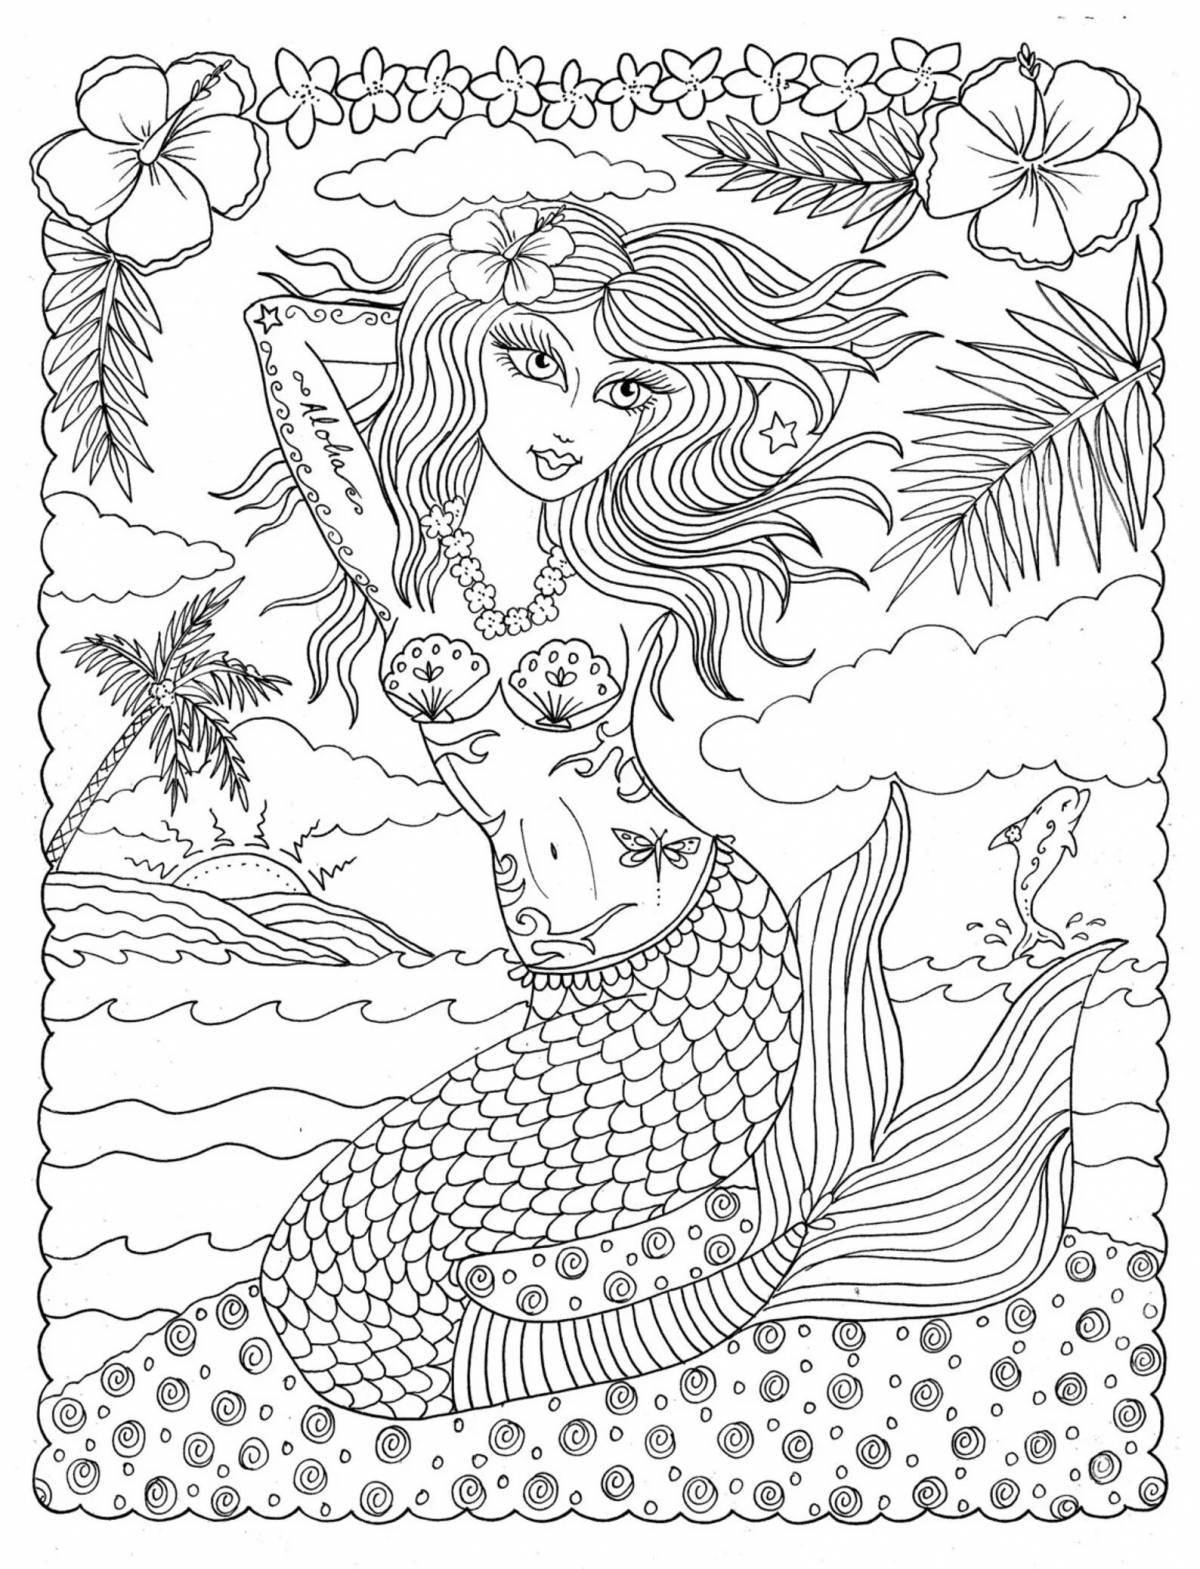 Charming coloring mermaid complex